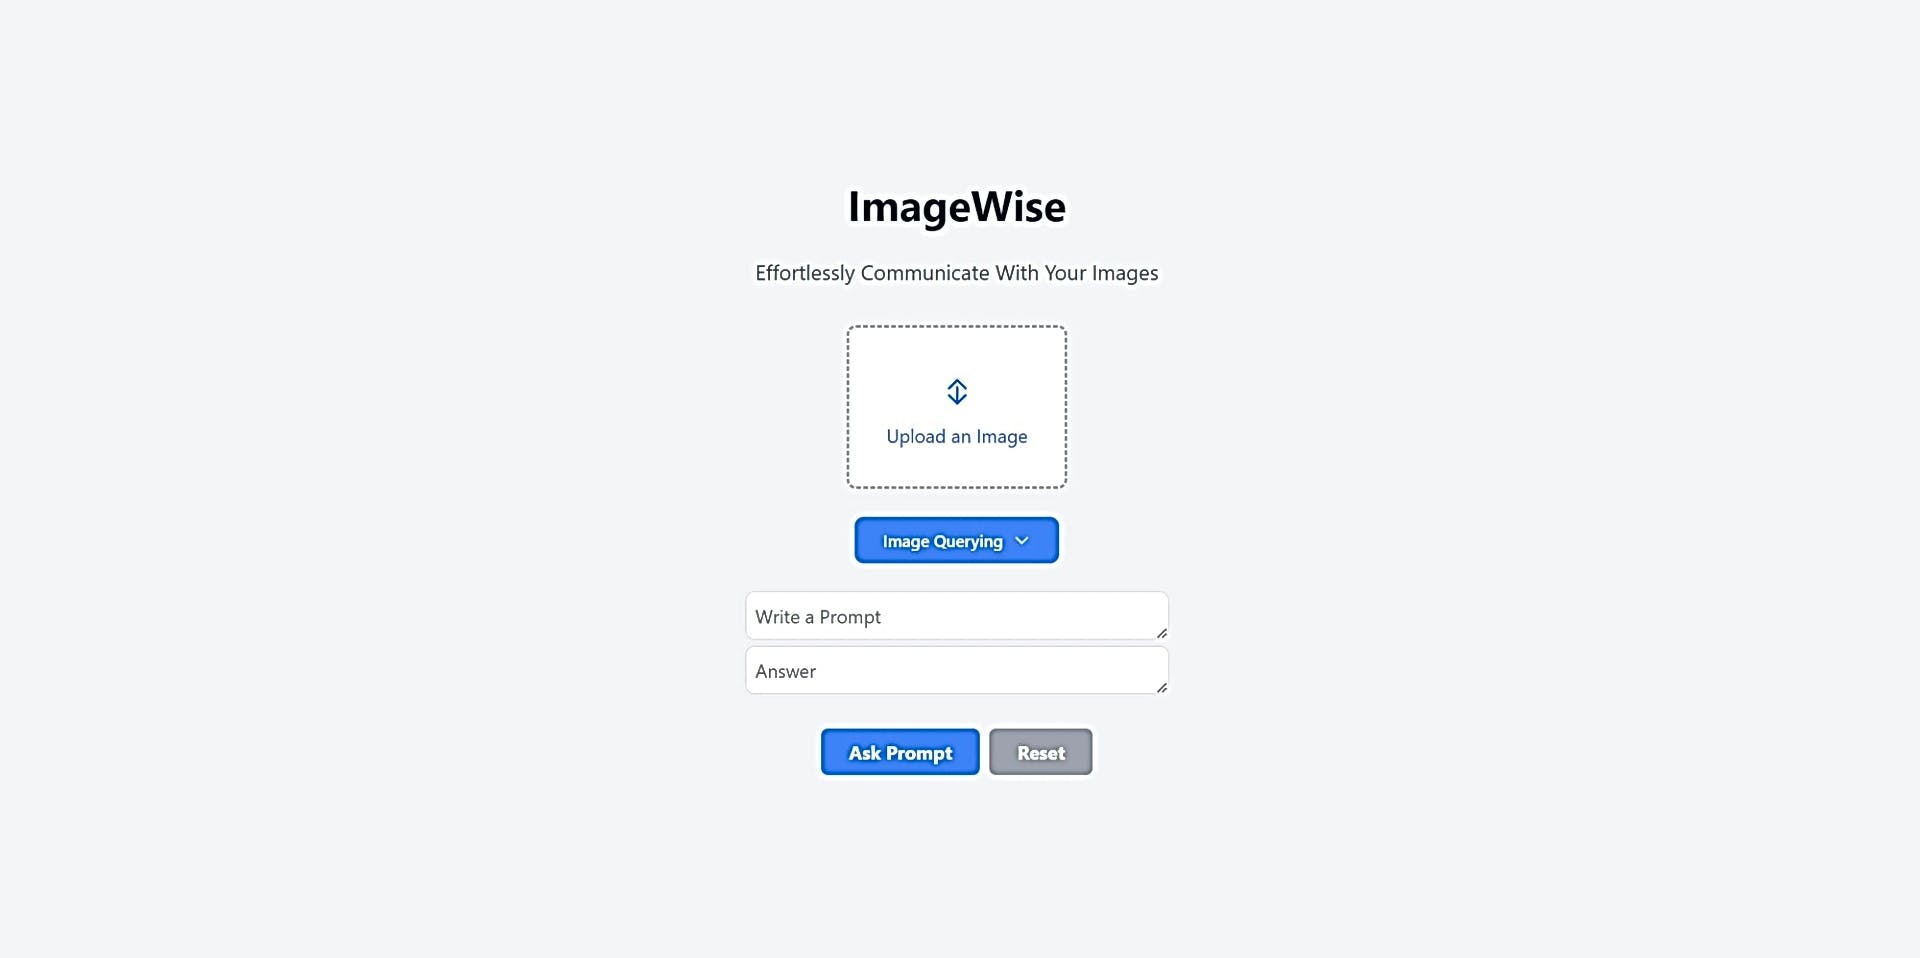 ImageWise featured